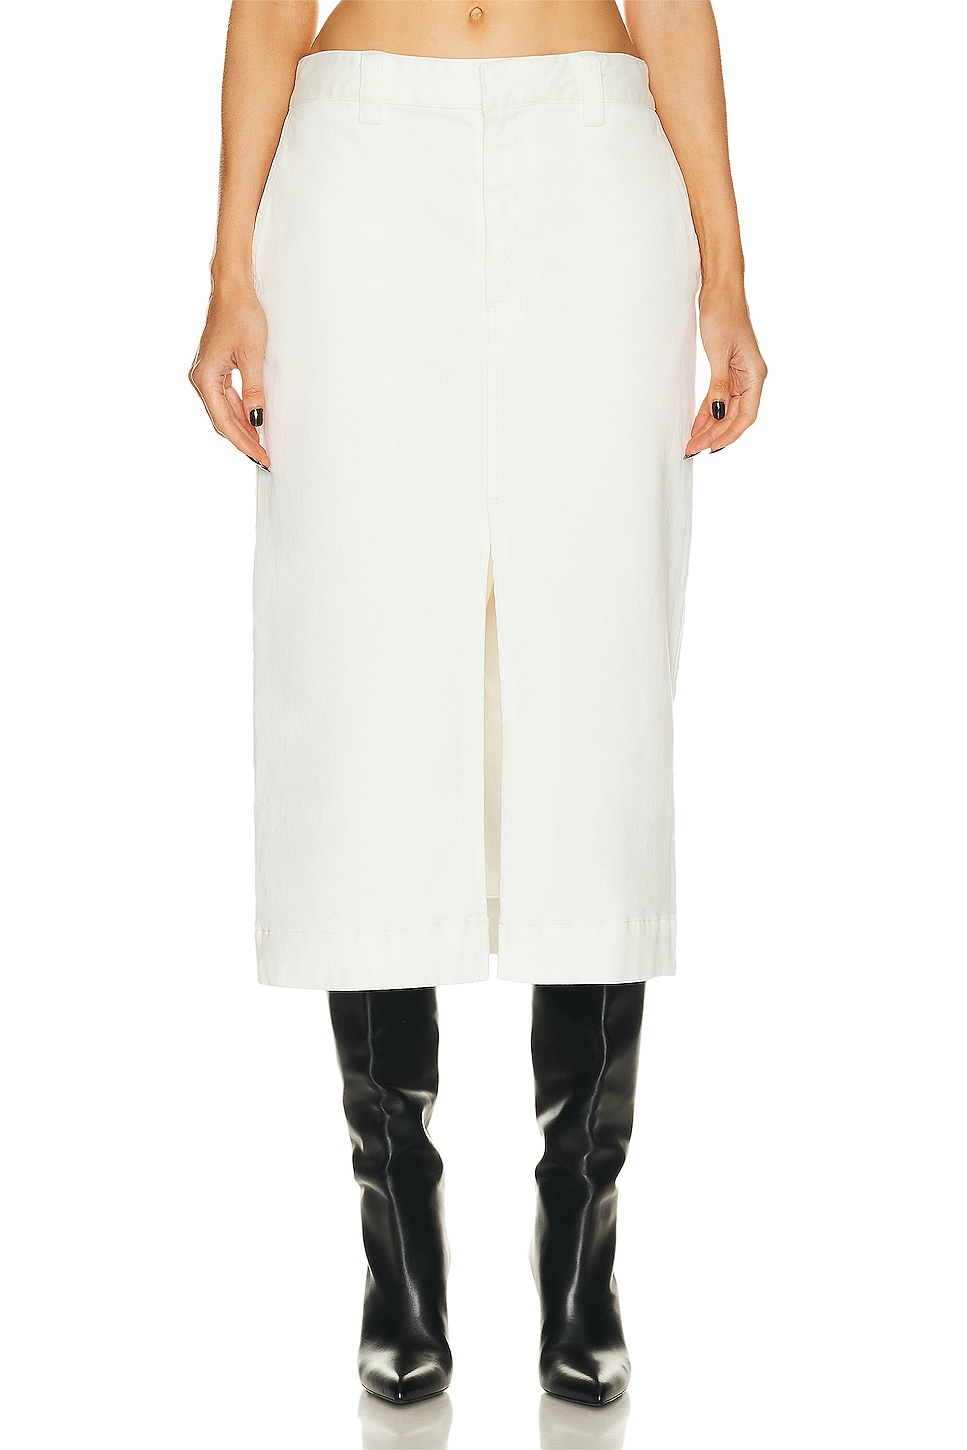 Enza Costa Soft Touch Slit Skirt in Undyed | FWRD